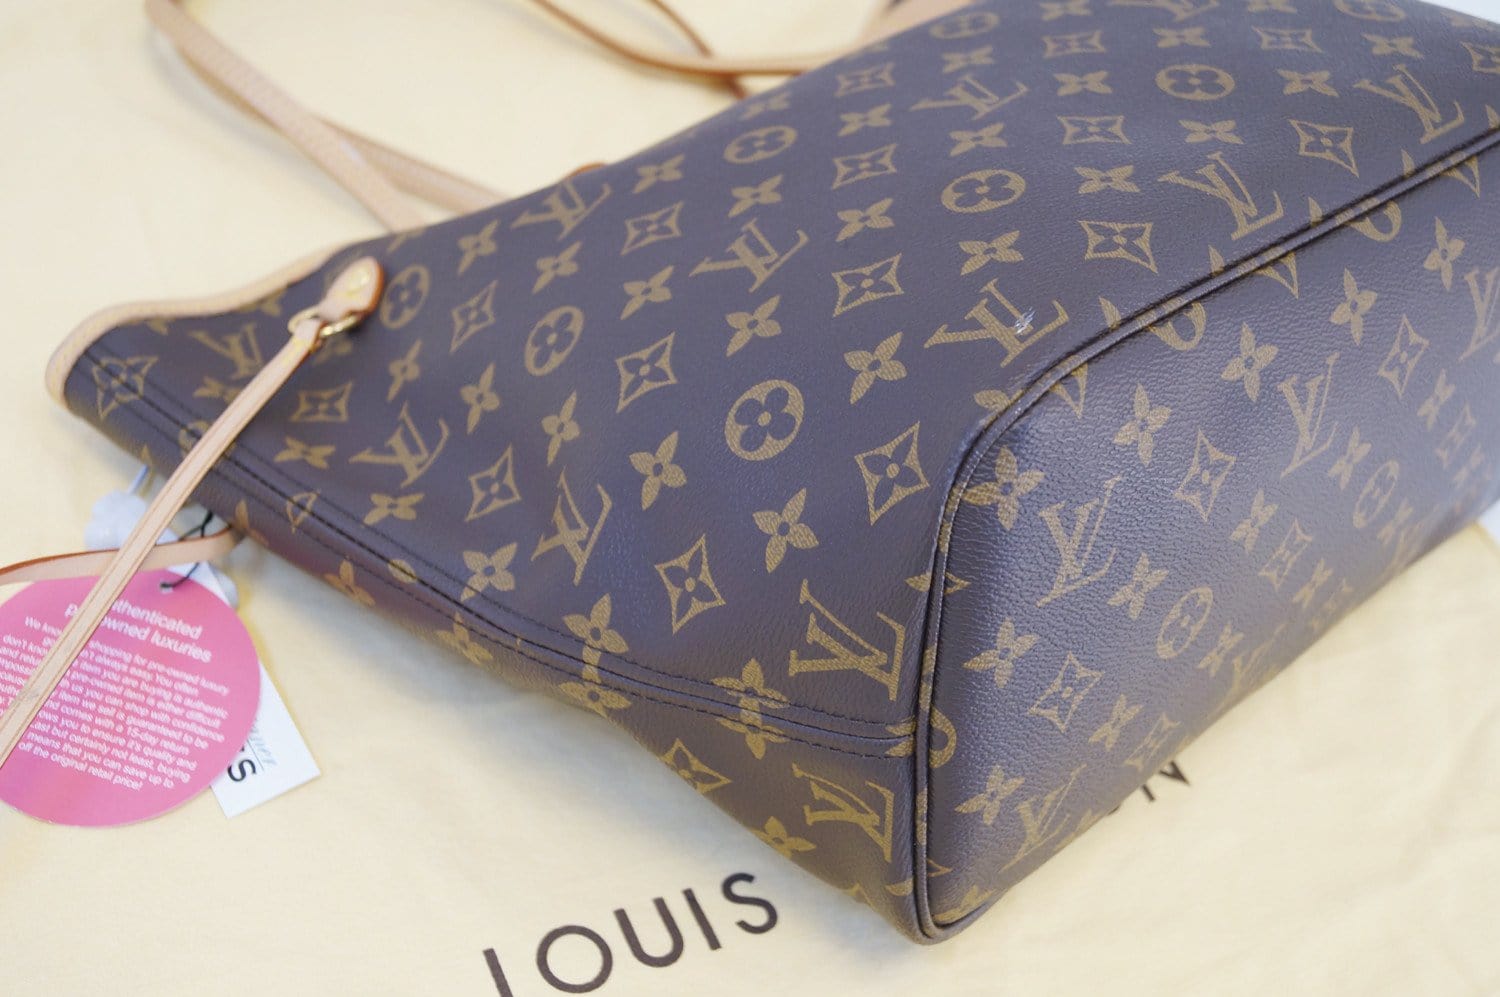 Pin by 𝑱𝒖𝒃𝒓𝒂𝒏 ☆ on Ajnabi  Louis vuitton bag neverfull, Vuitton  neverfull, Louis vuitton neverfull